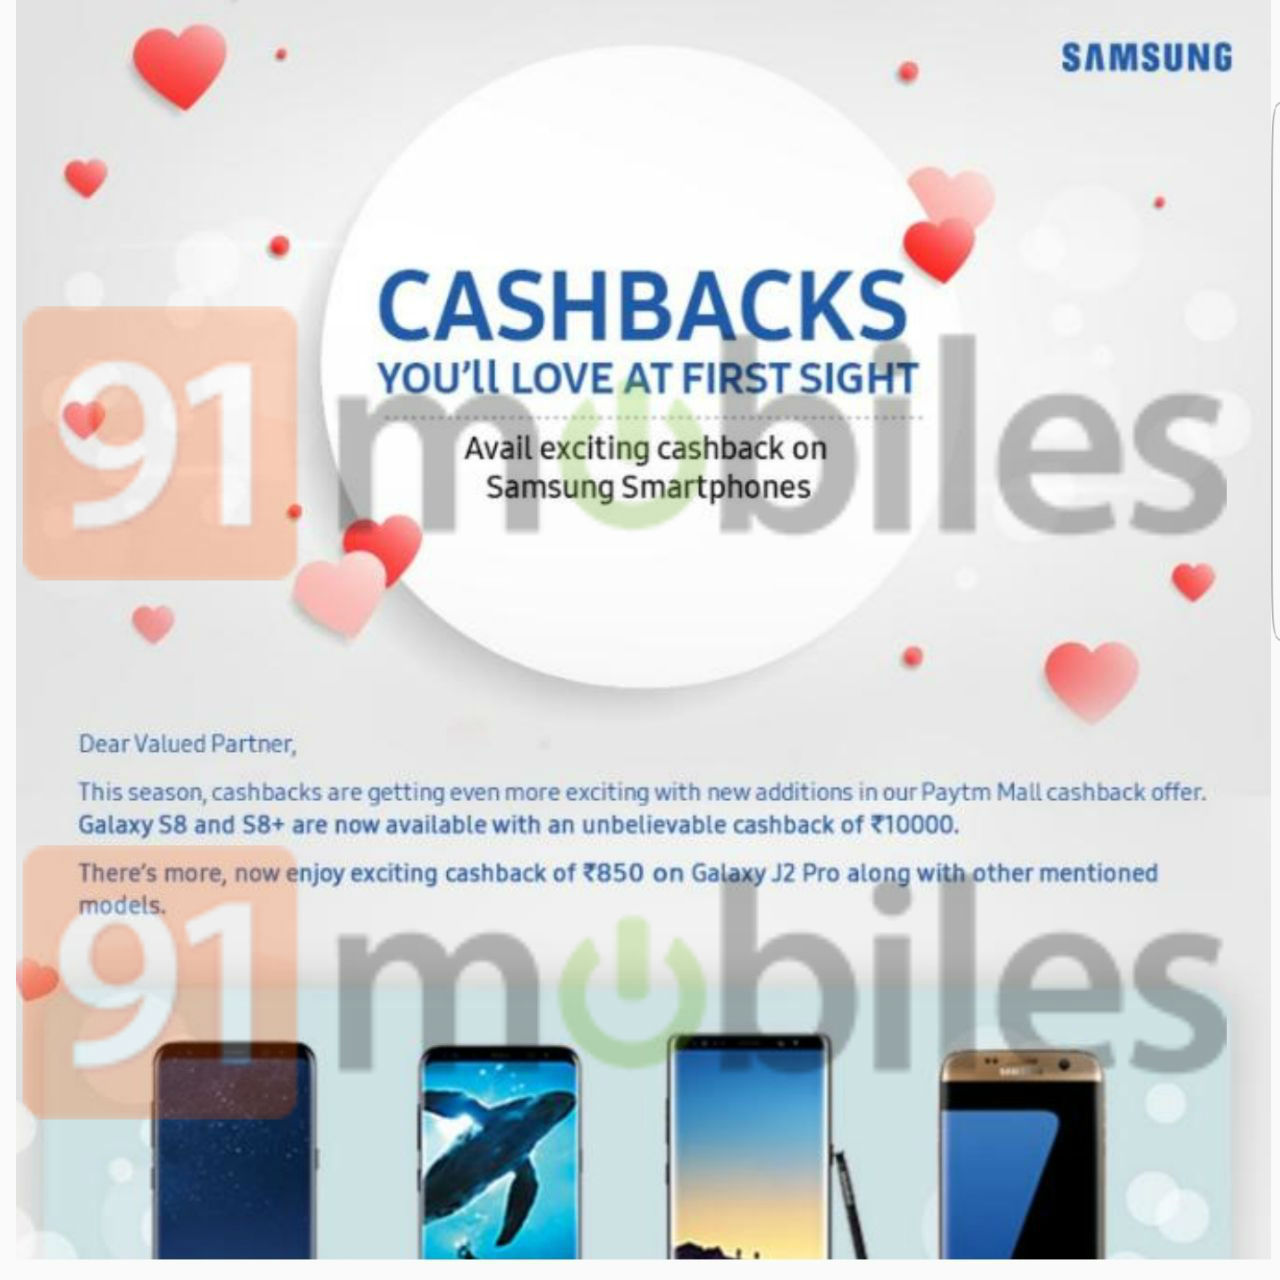 valentines day offers rs 10000 cashback on samsung galaxy s8 and iphone